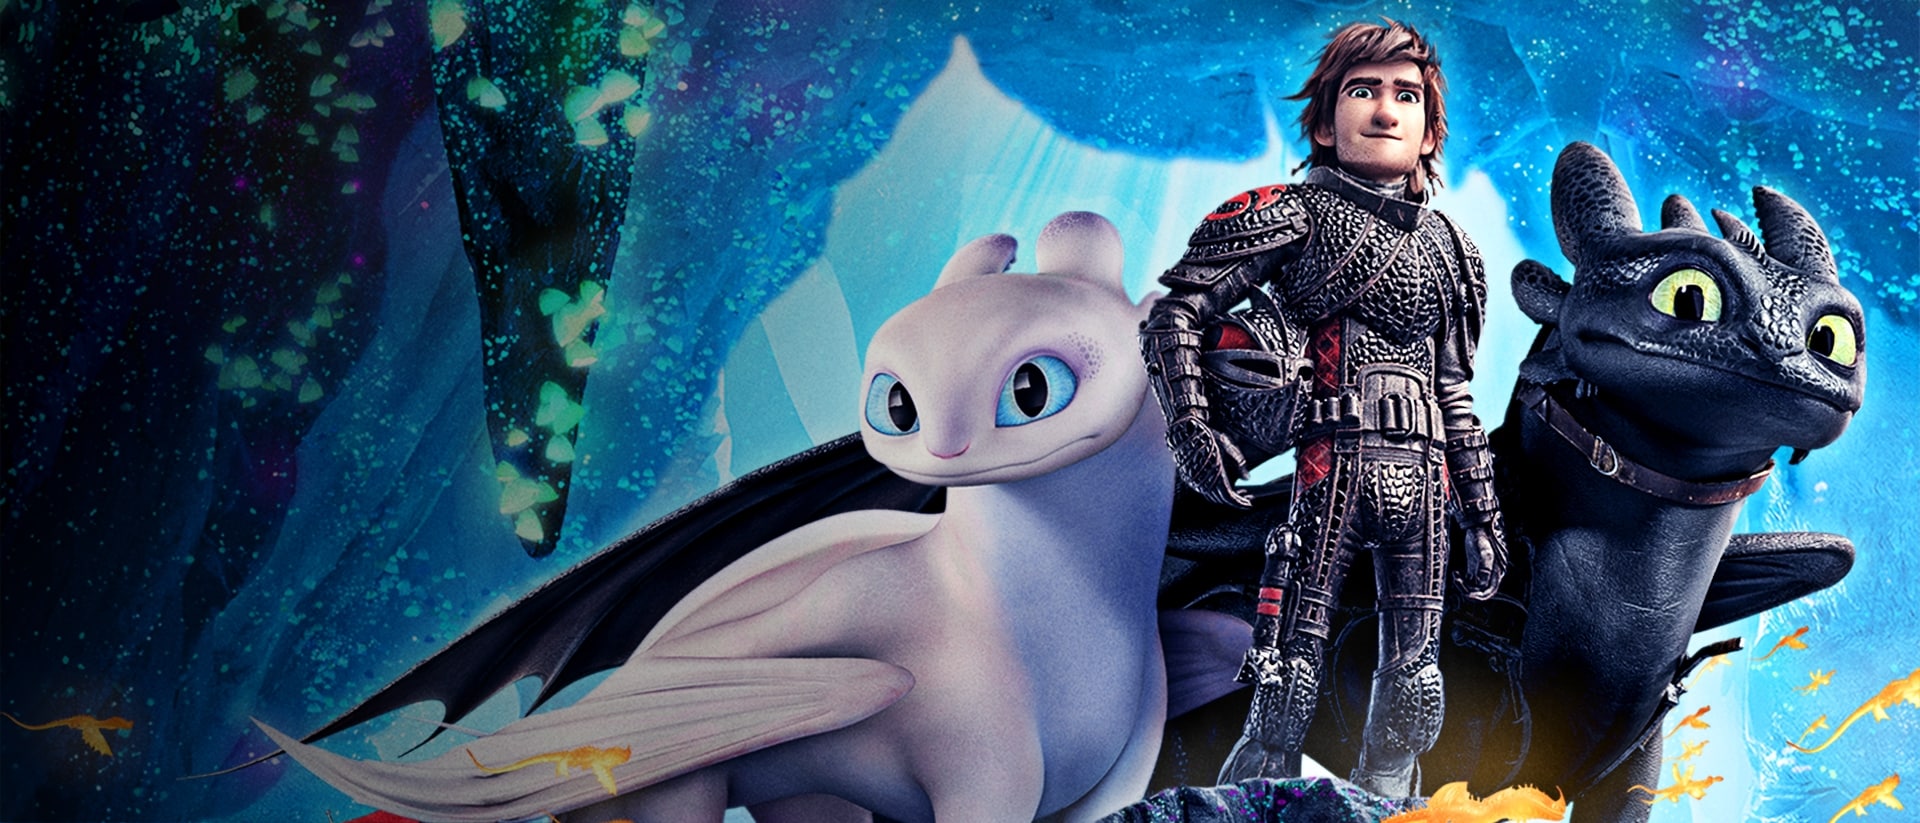 christi leedy recommends how to train your dragon pics pic